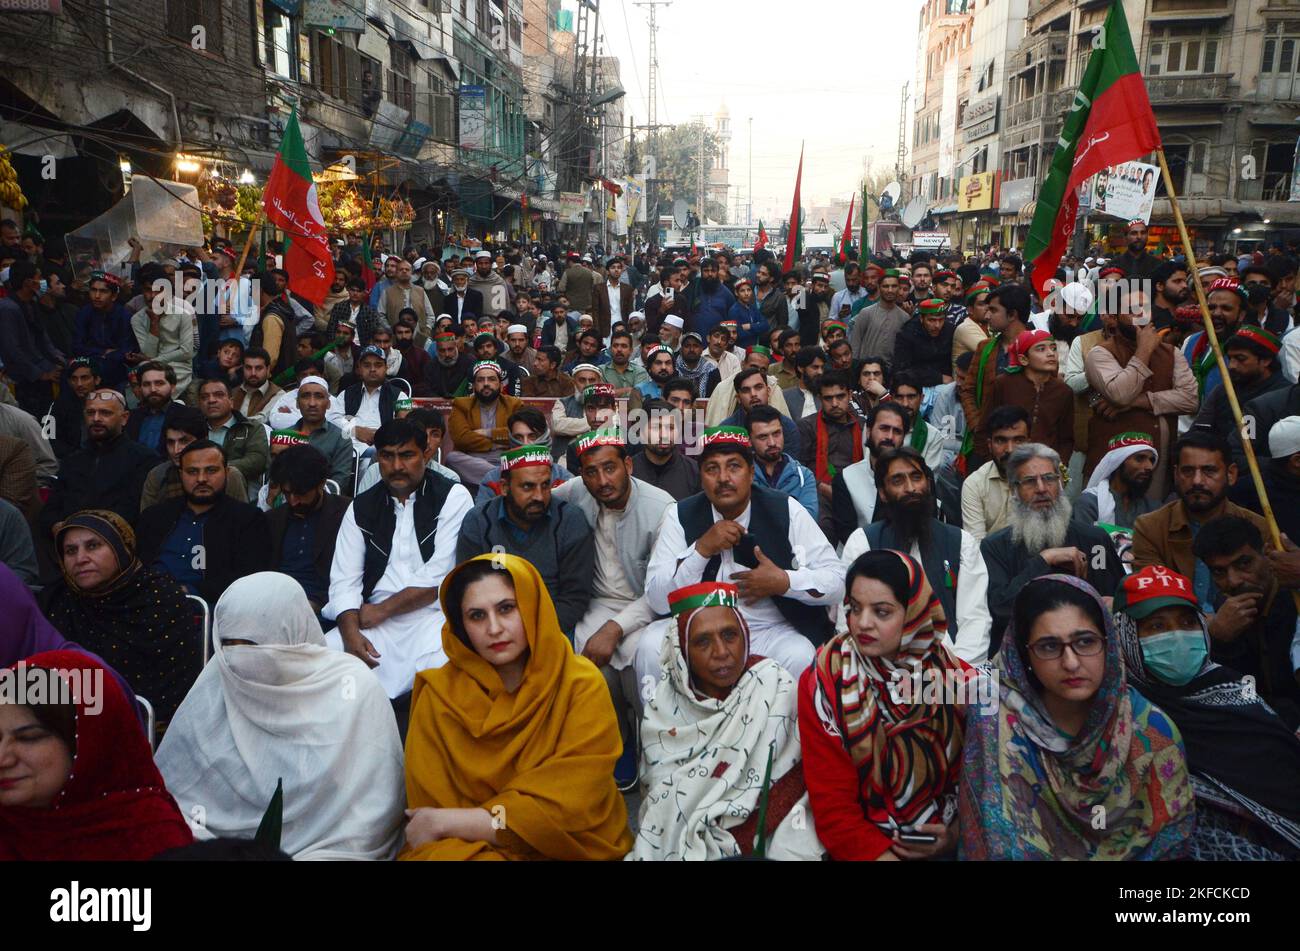 Peshawar, Pakistan, 17/11/2022, Supporters watch a video-linked address of former Prime Minister Imran Khan, head of the Pakistan Tehrik-e-Insaf (PTI) party, as the protest march continues followings its resumption, days after an assassination attempt on the former prime minister halted the rally at G T Road in Peshawar. The march to the capital Islamabad resumed from eastern Punjab Wazirabad city, as Khan keeps pressing for snap elections, a demand rejected by the government of Prime Minister Sharif. The Tehreek-e-Insaf party began its march from Lahore in late October, but it was stopped due Stock Photo